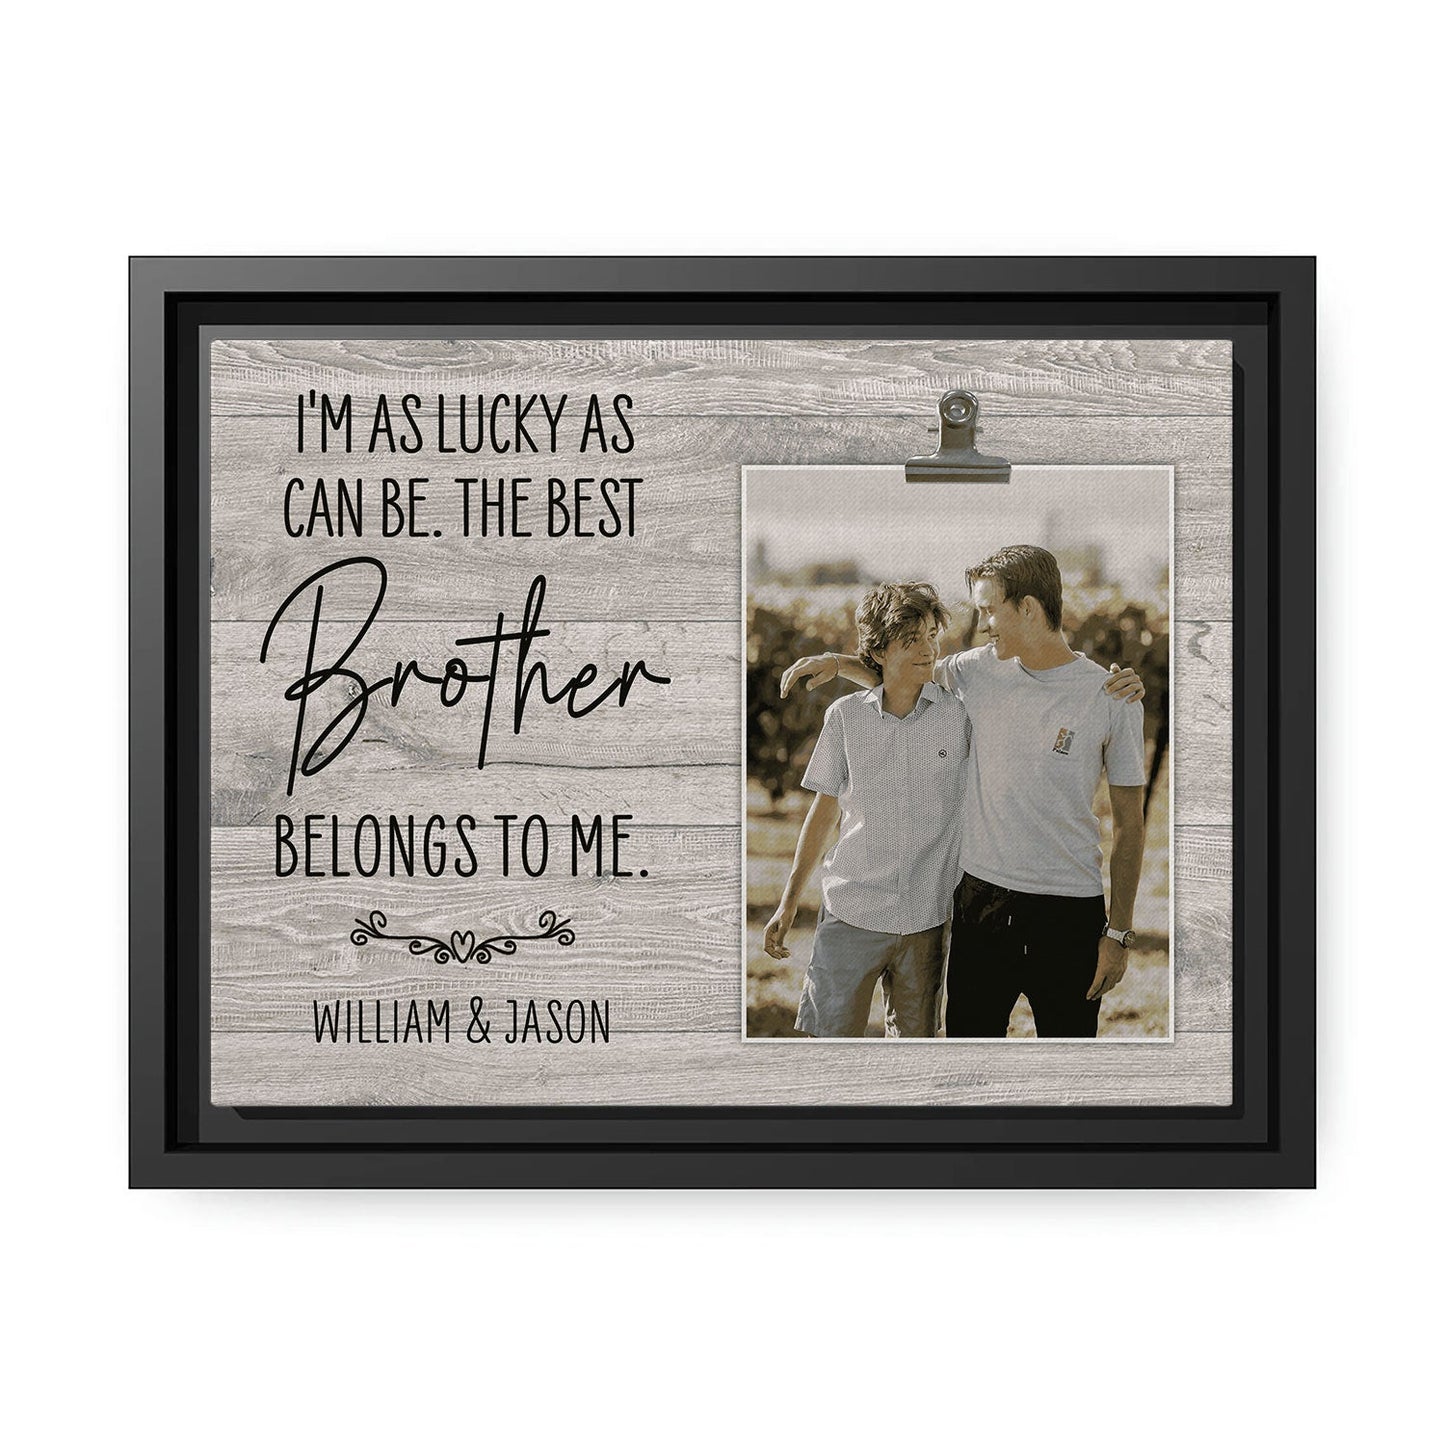 The Best Brother Belongs To Me - Personalized Birthday or Christmas gift For Brother - Custom Canvas Print - MyMindfulGifts